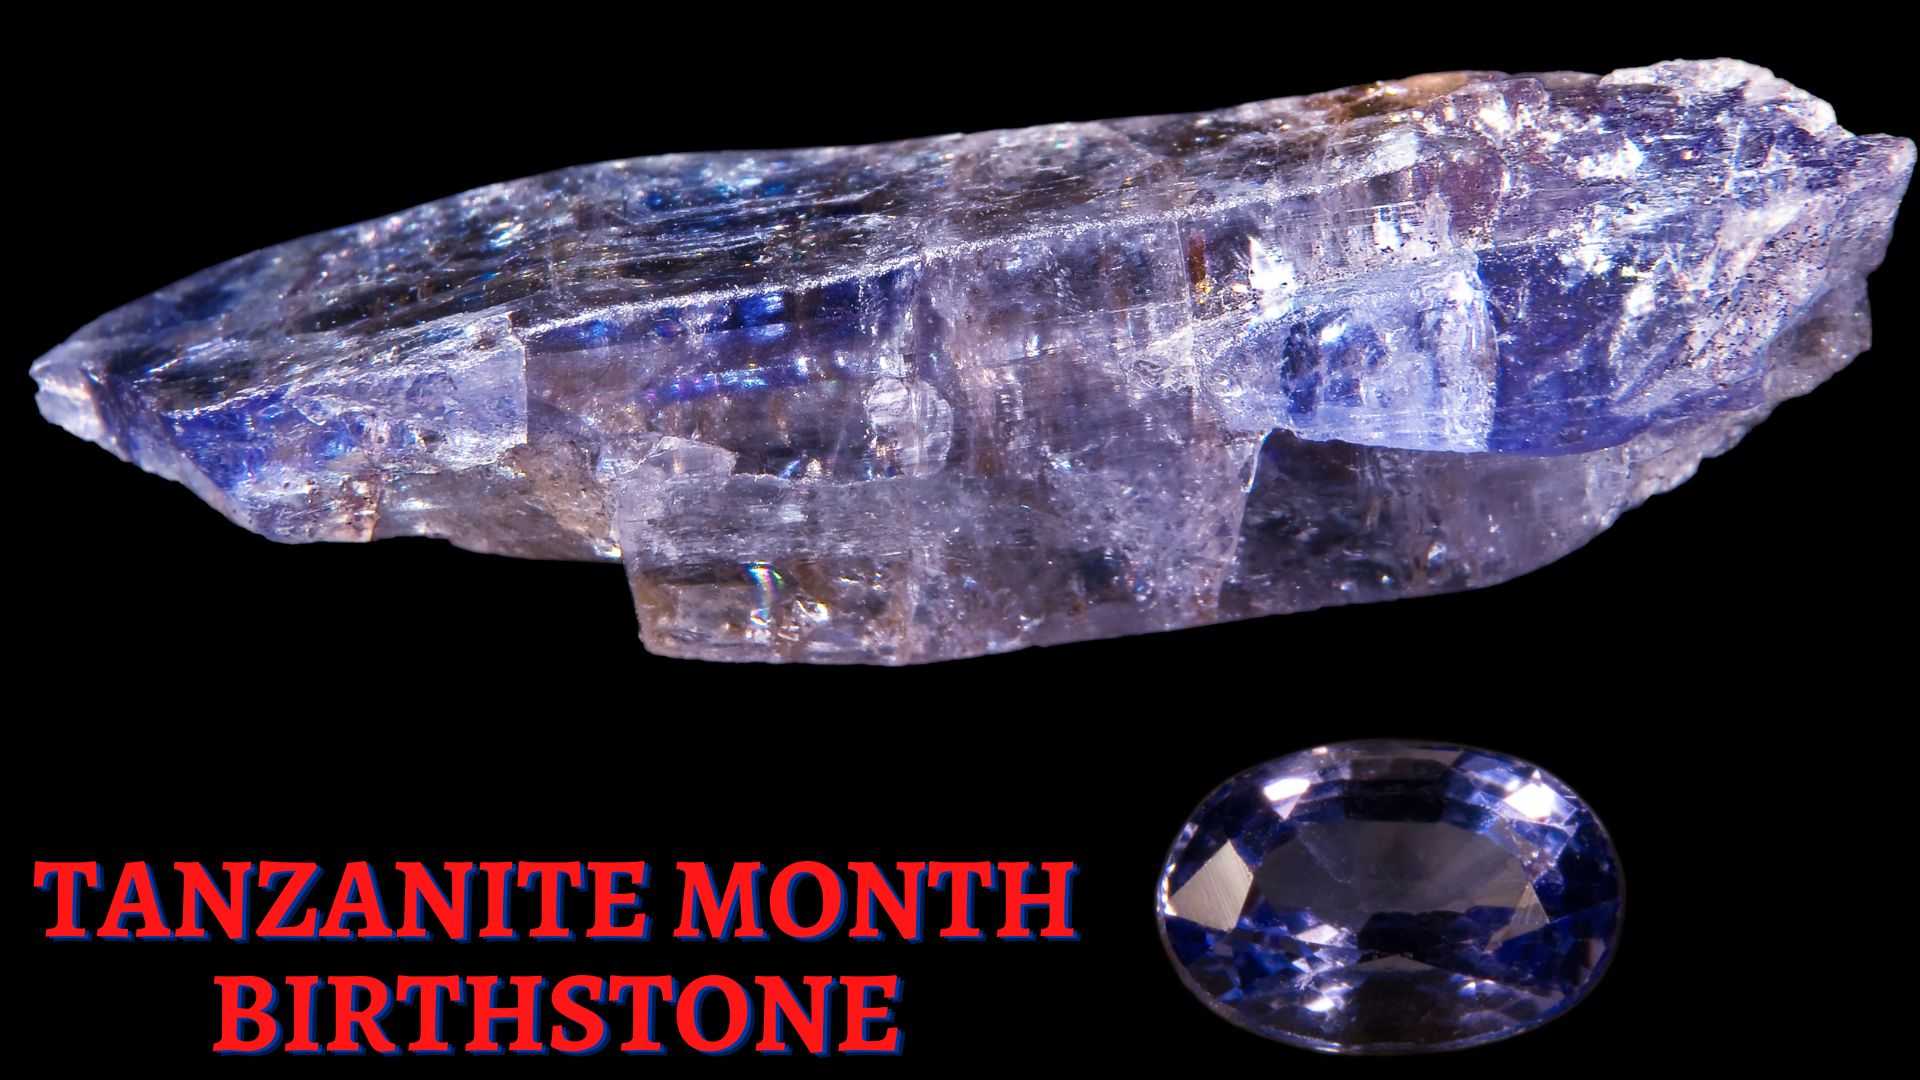 Tanzanite Month Birthstone - The Birthstone For The Dreamers Born In December